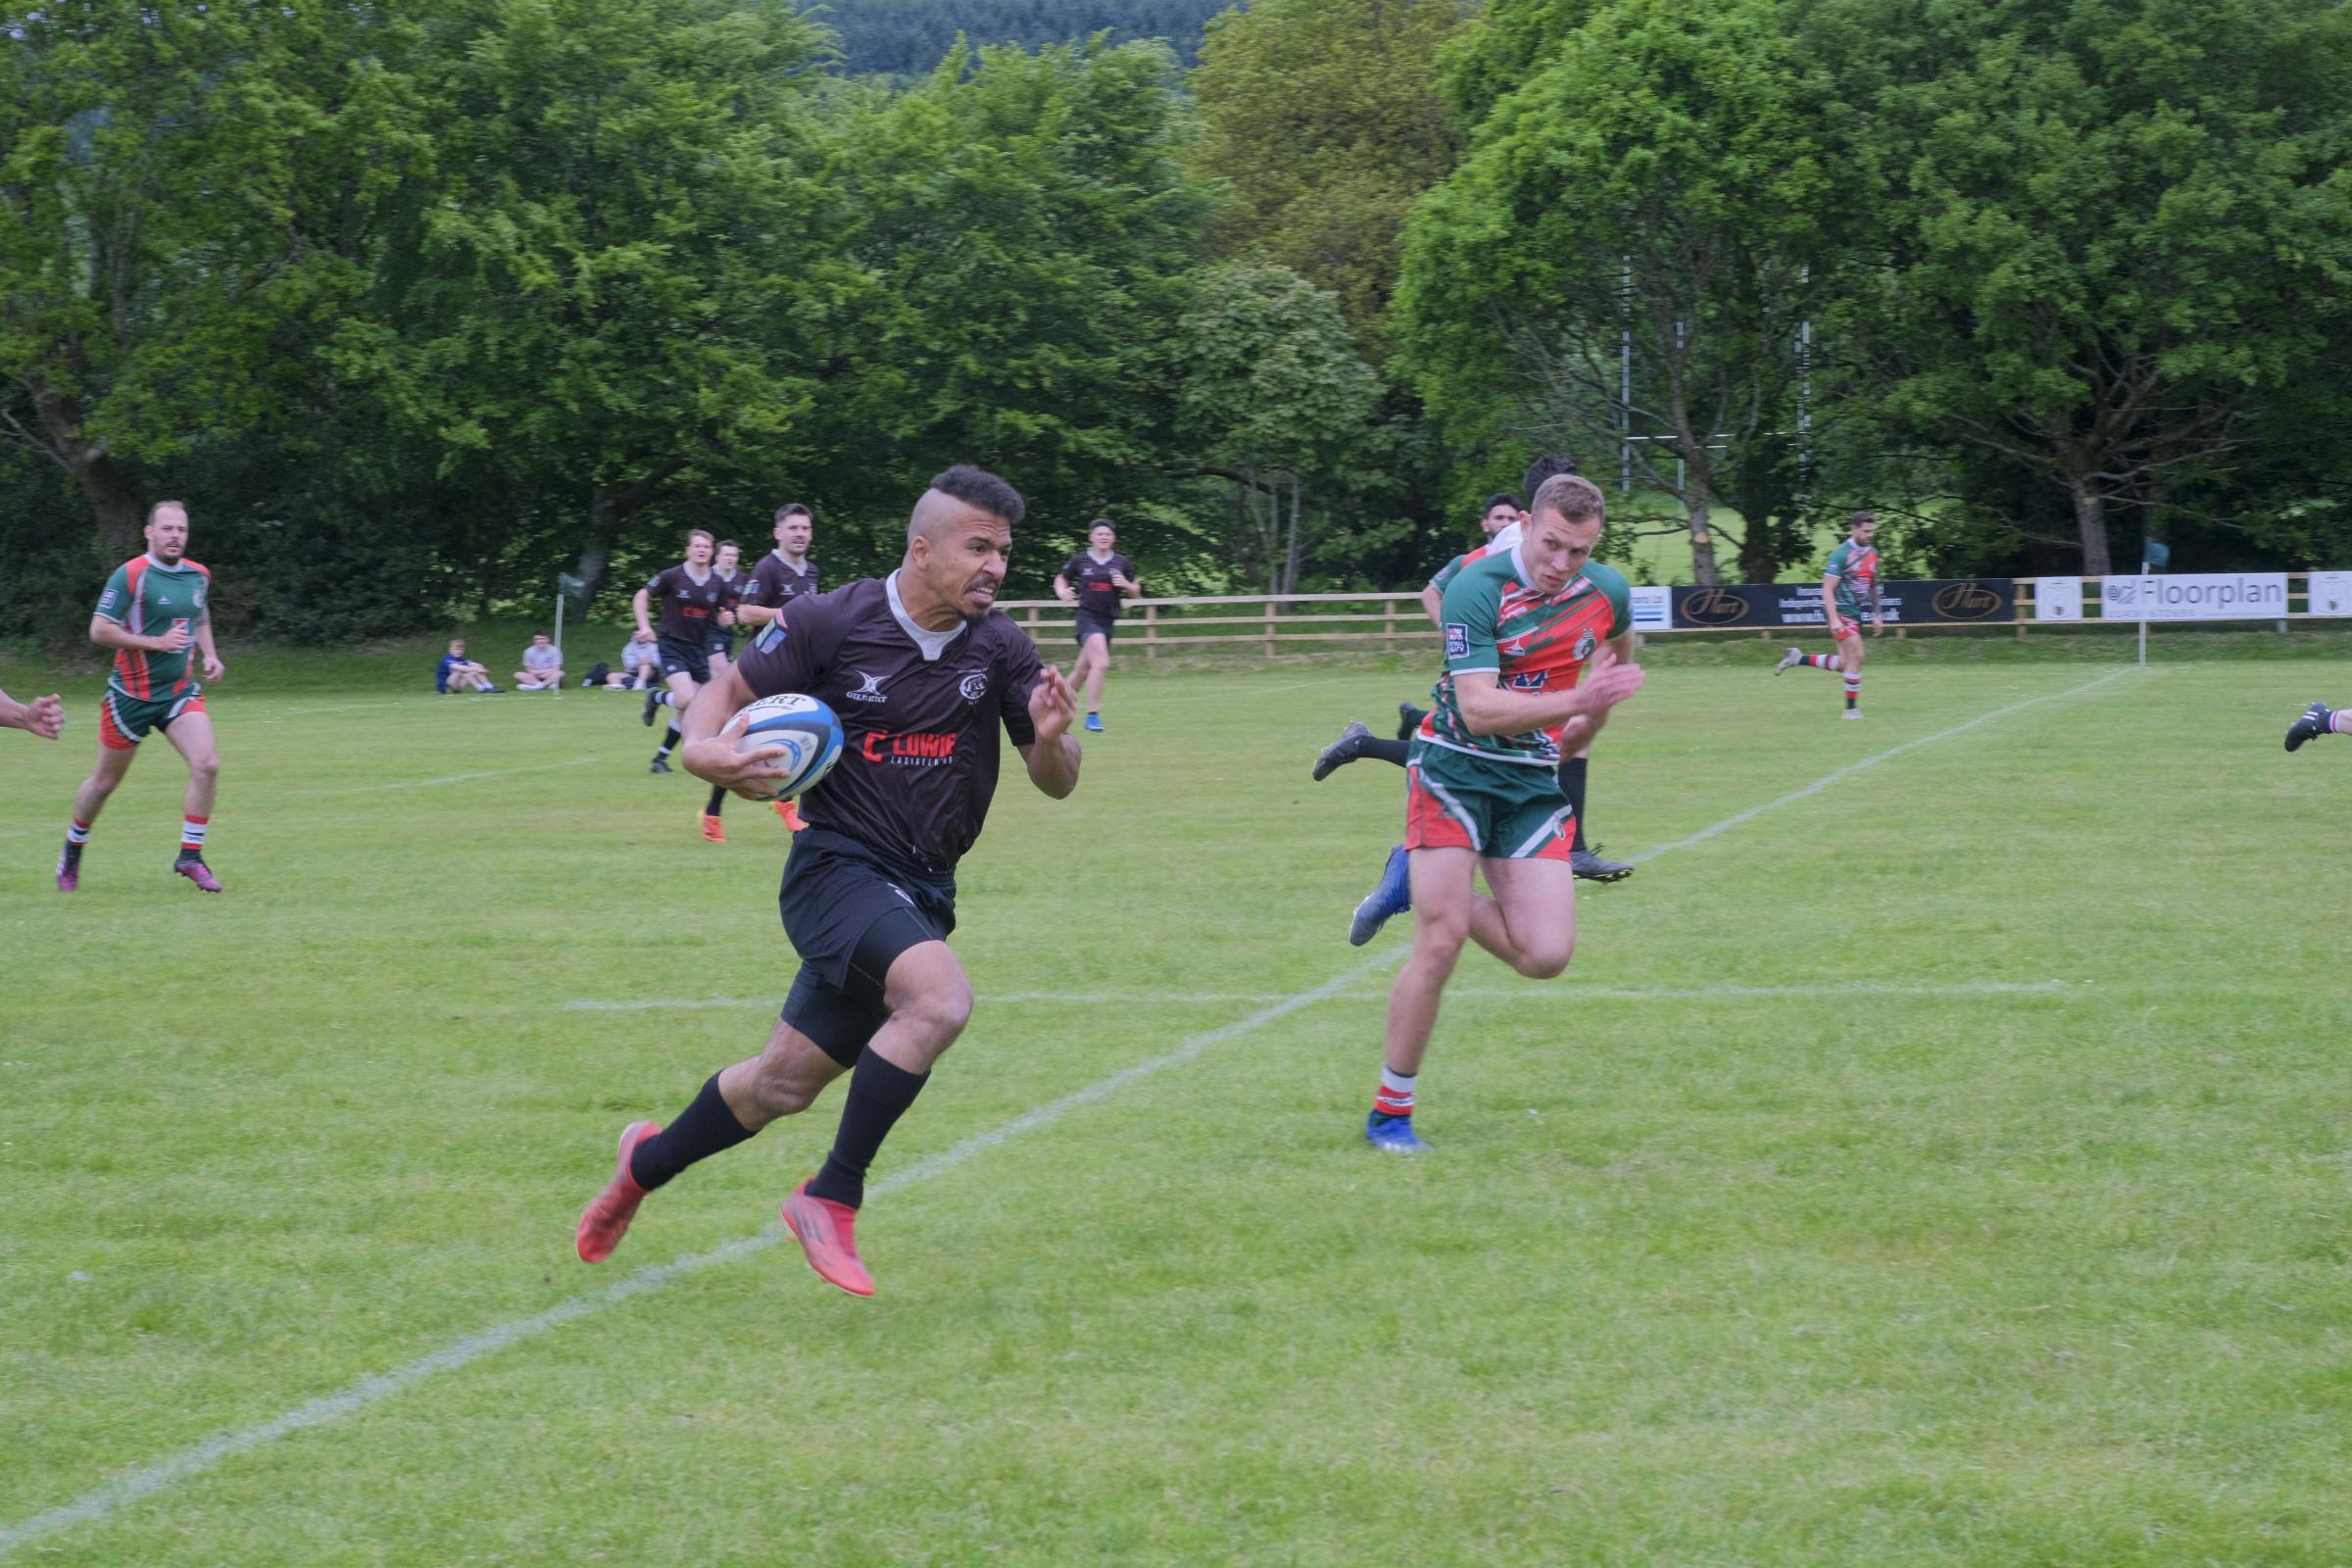 Rugby sevens action in Helensburgh on May 27